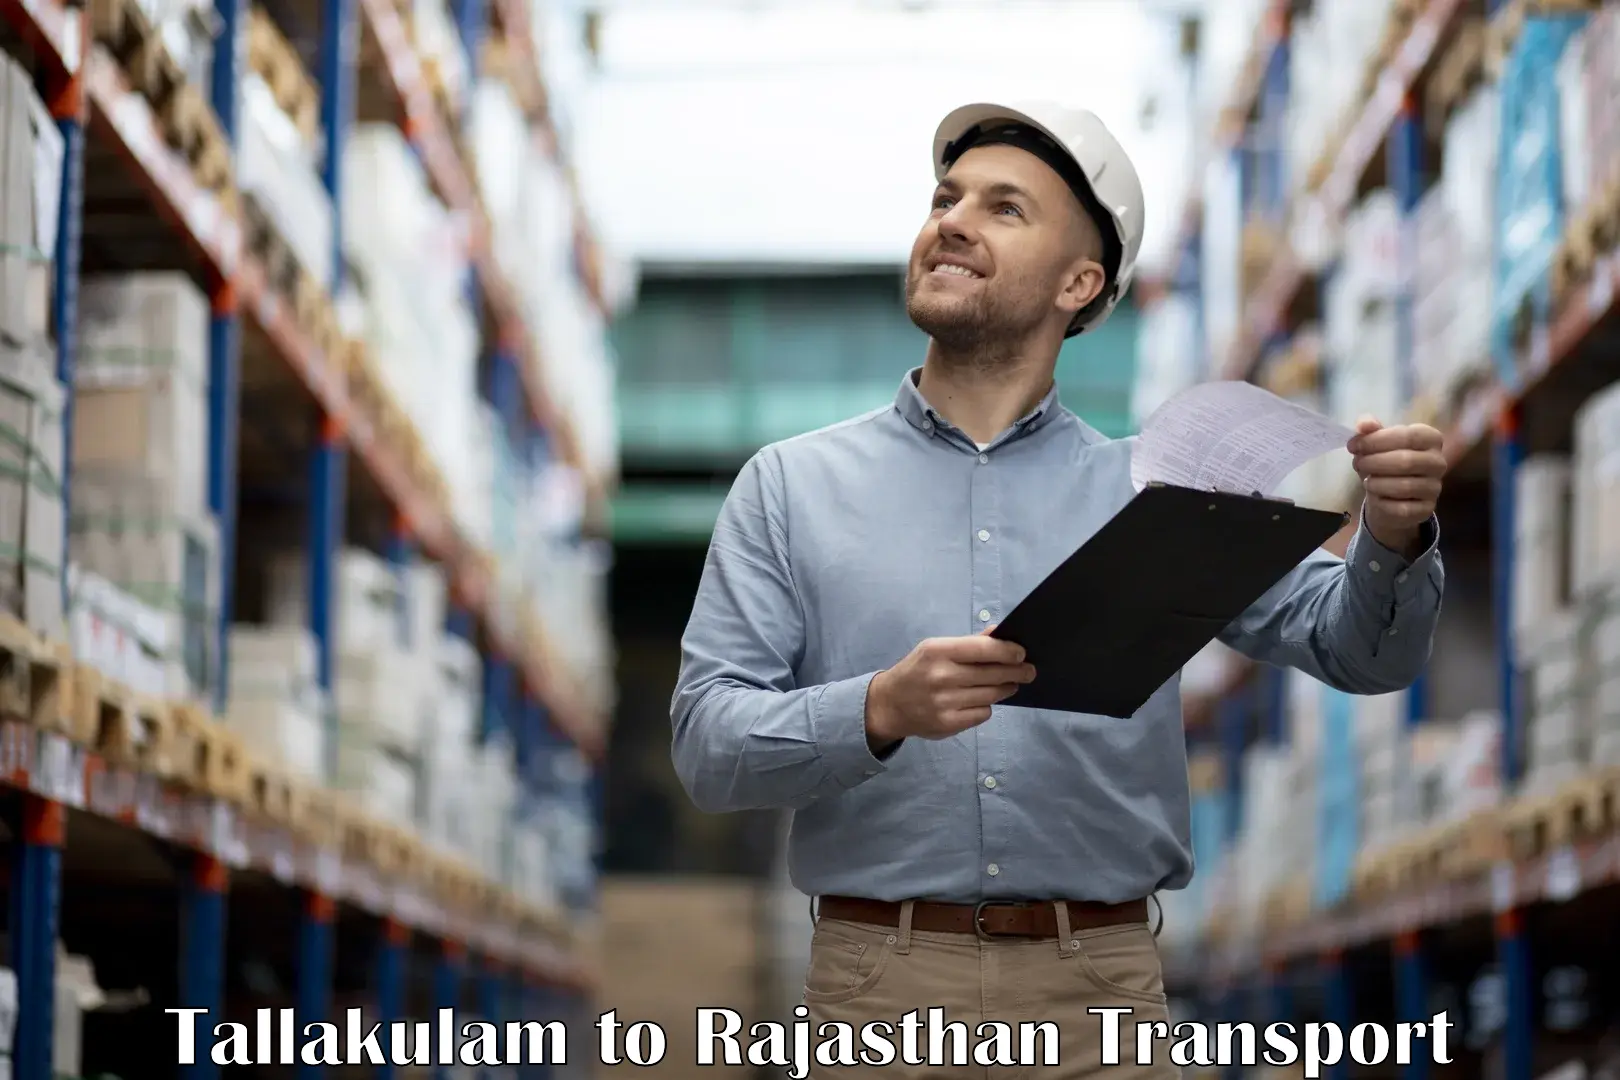 Container transportation services Tallakulam to Rajasthan